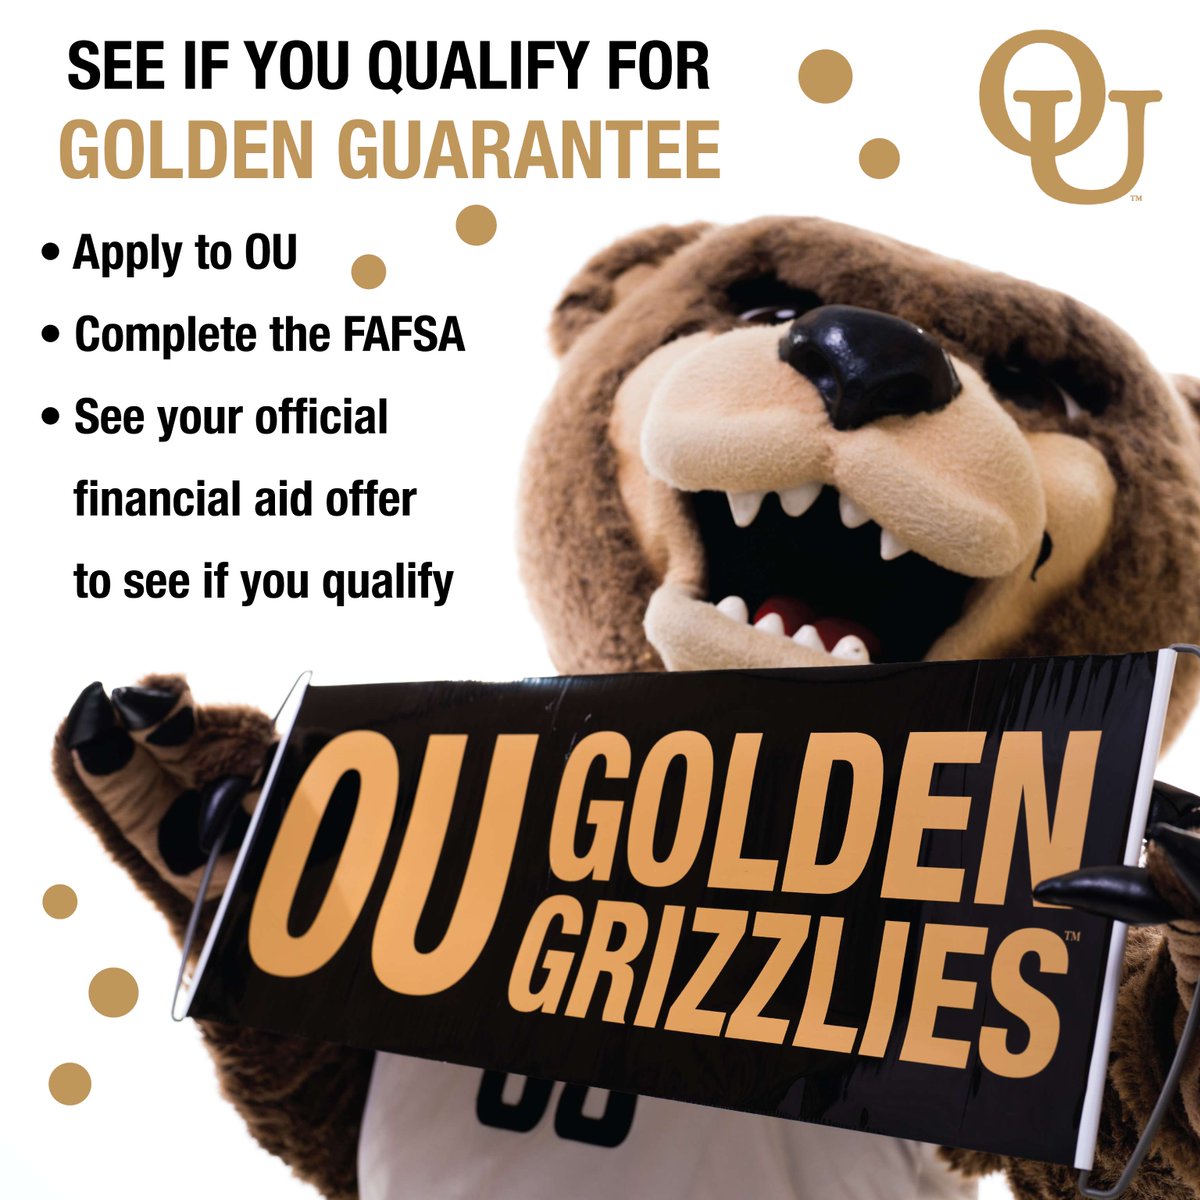 Oakland University is offering the Golden Guarantee! This is an opportunity for free tuition for eligible incoming first-year students. Apply to OU and complete the FAFSA to see if you qualify. Visit oakland.edu/tuition-guaran… to learn more! #FutureGrizzly